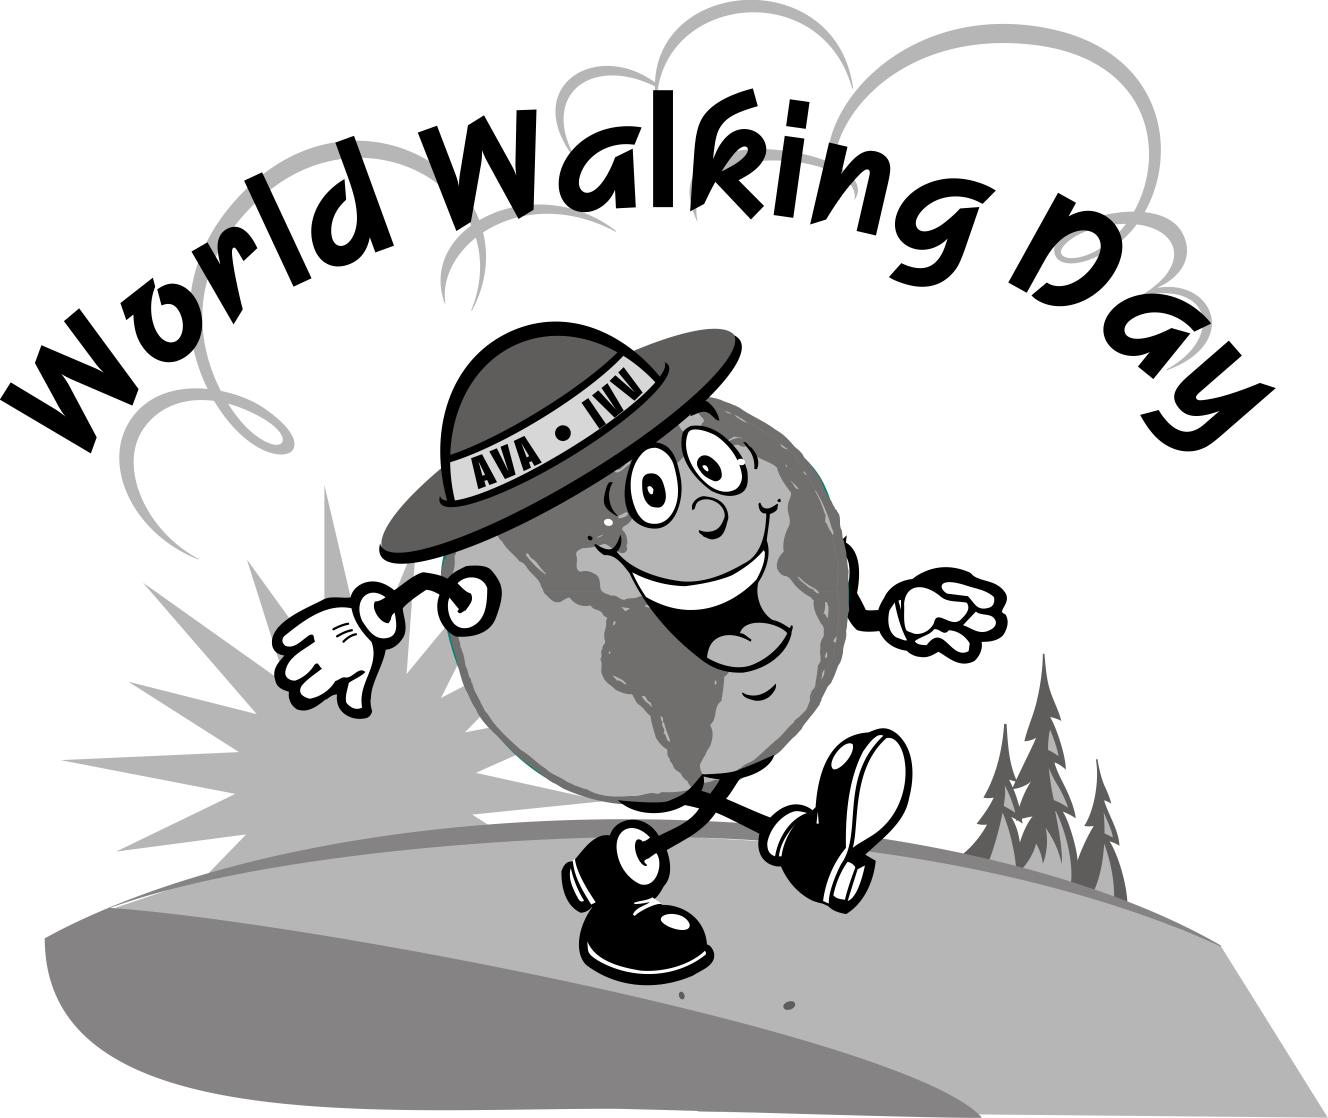 World Walking Day Full Size Black and White Graphic.